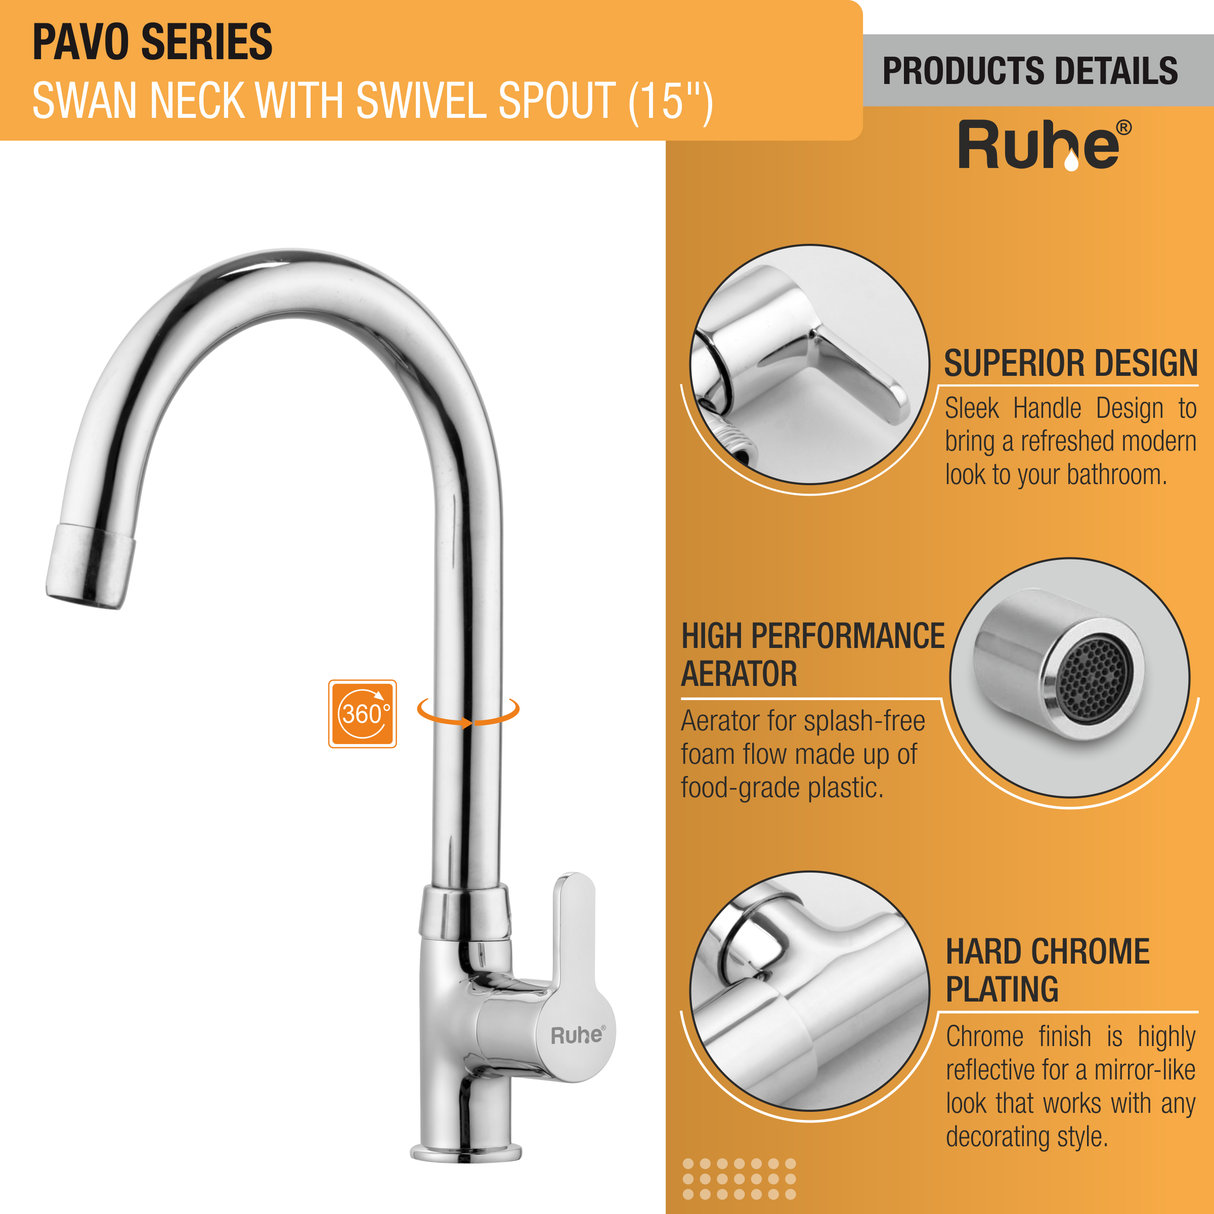 Pavo Swan Neck with Medium (15 inches) Round Swivel Spout Faucet details